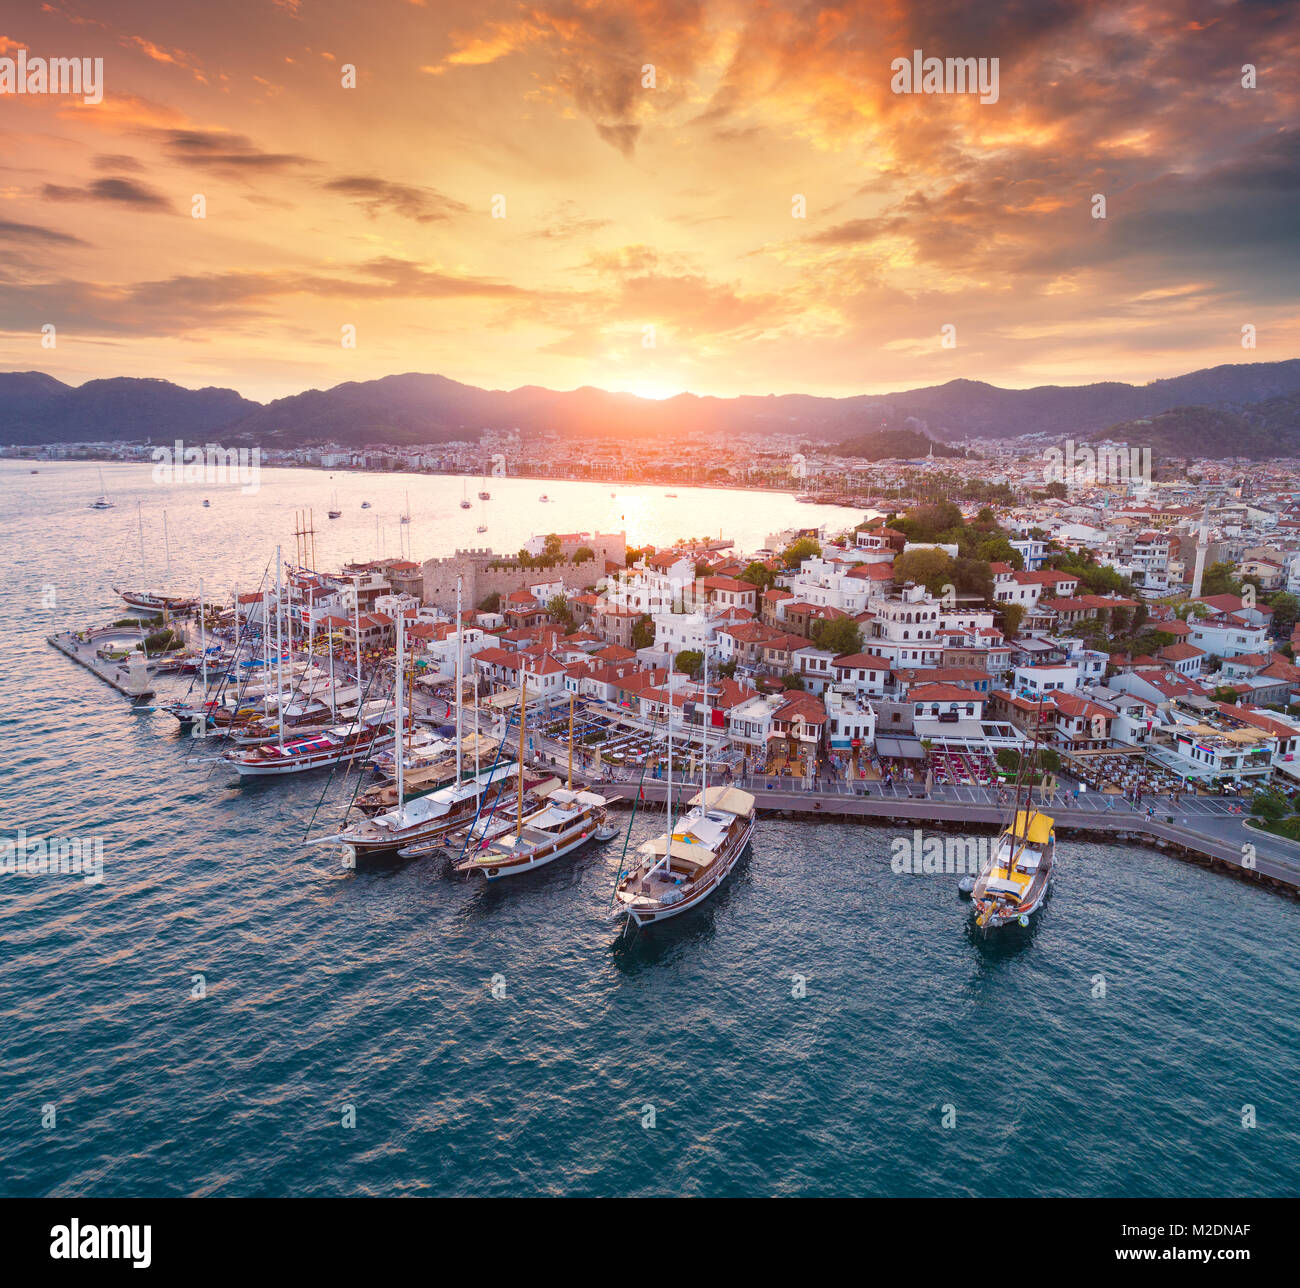 Aerial view of boats and yachts and beautiful architecture at sunset in Marmaris, Turkey. Landscape with boats in marina bay, sea, city, mountains, co Stock Photo